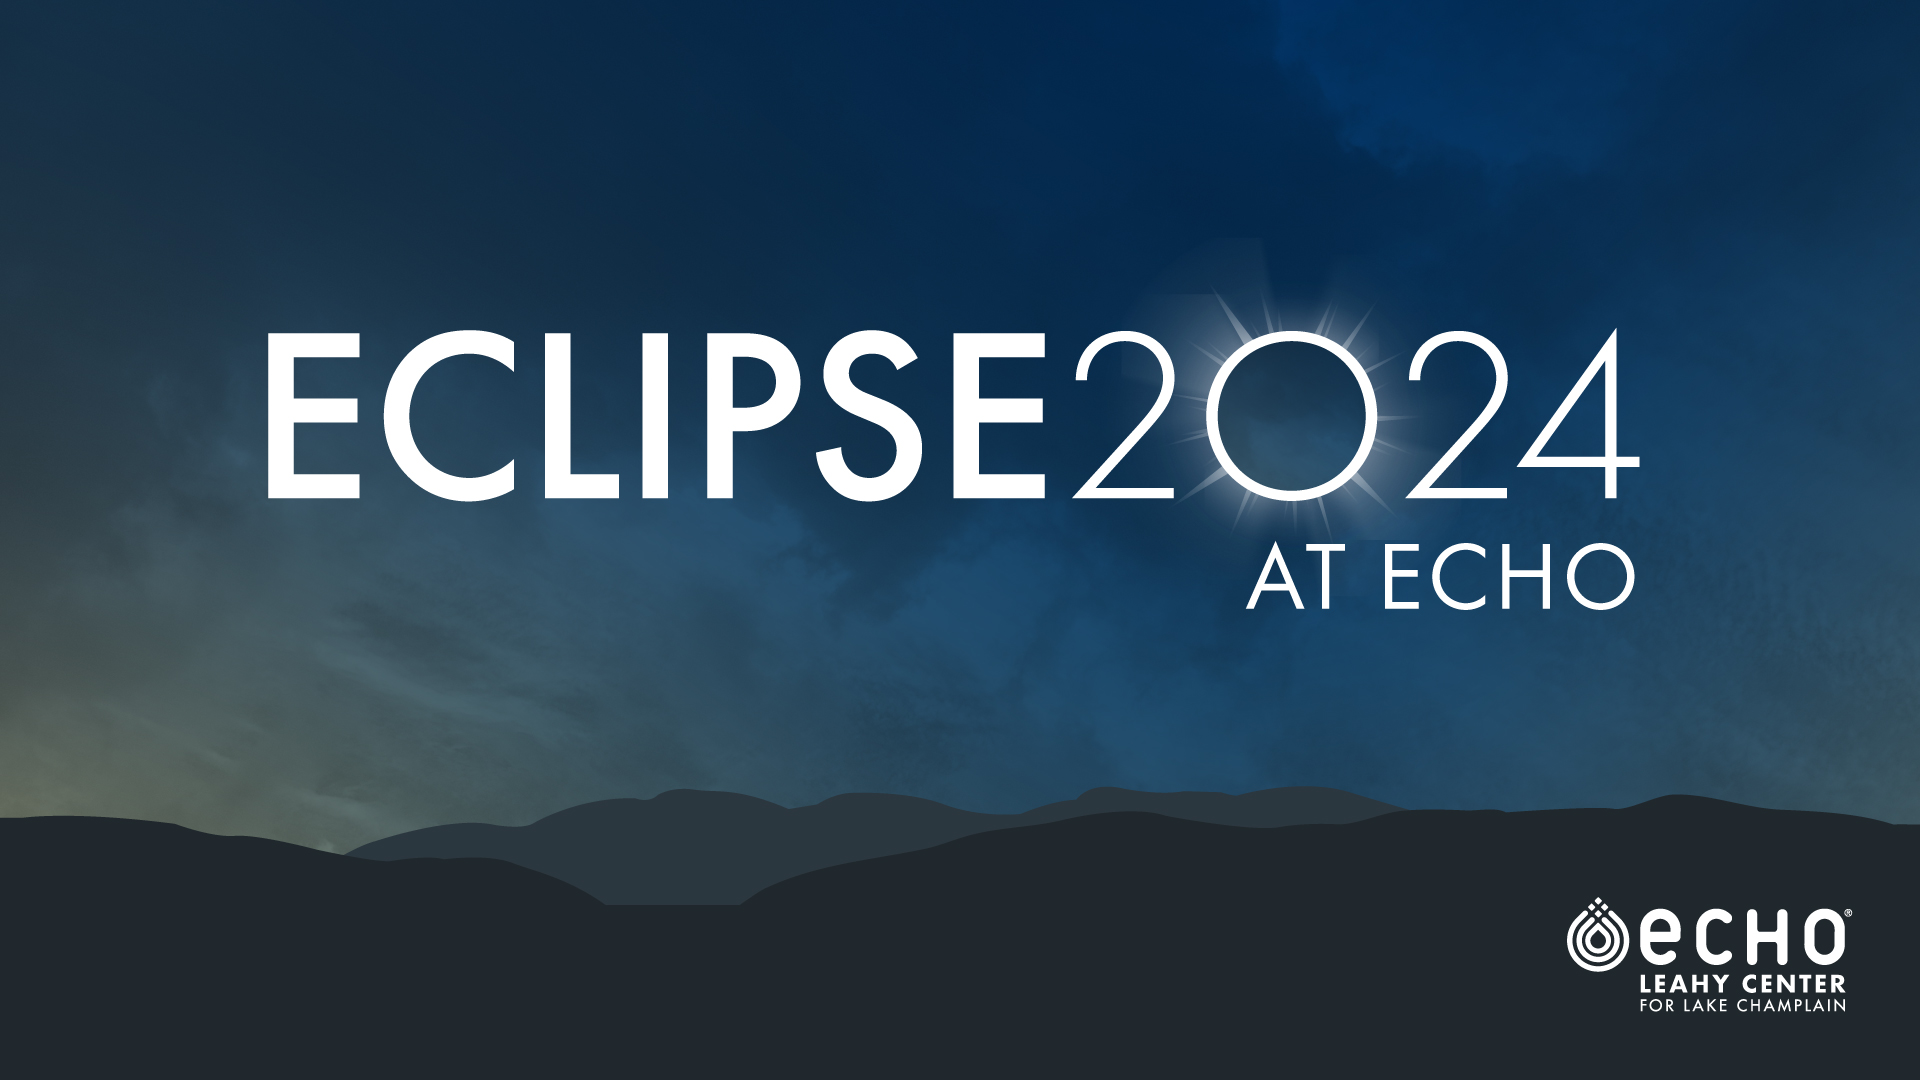 Graphic of a night sky with text that reads "Eclipse 2024 at ECHO"